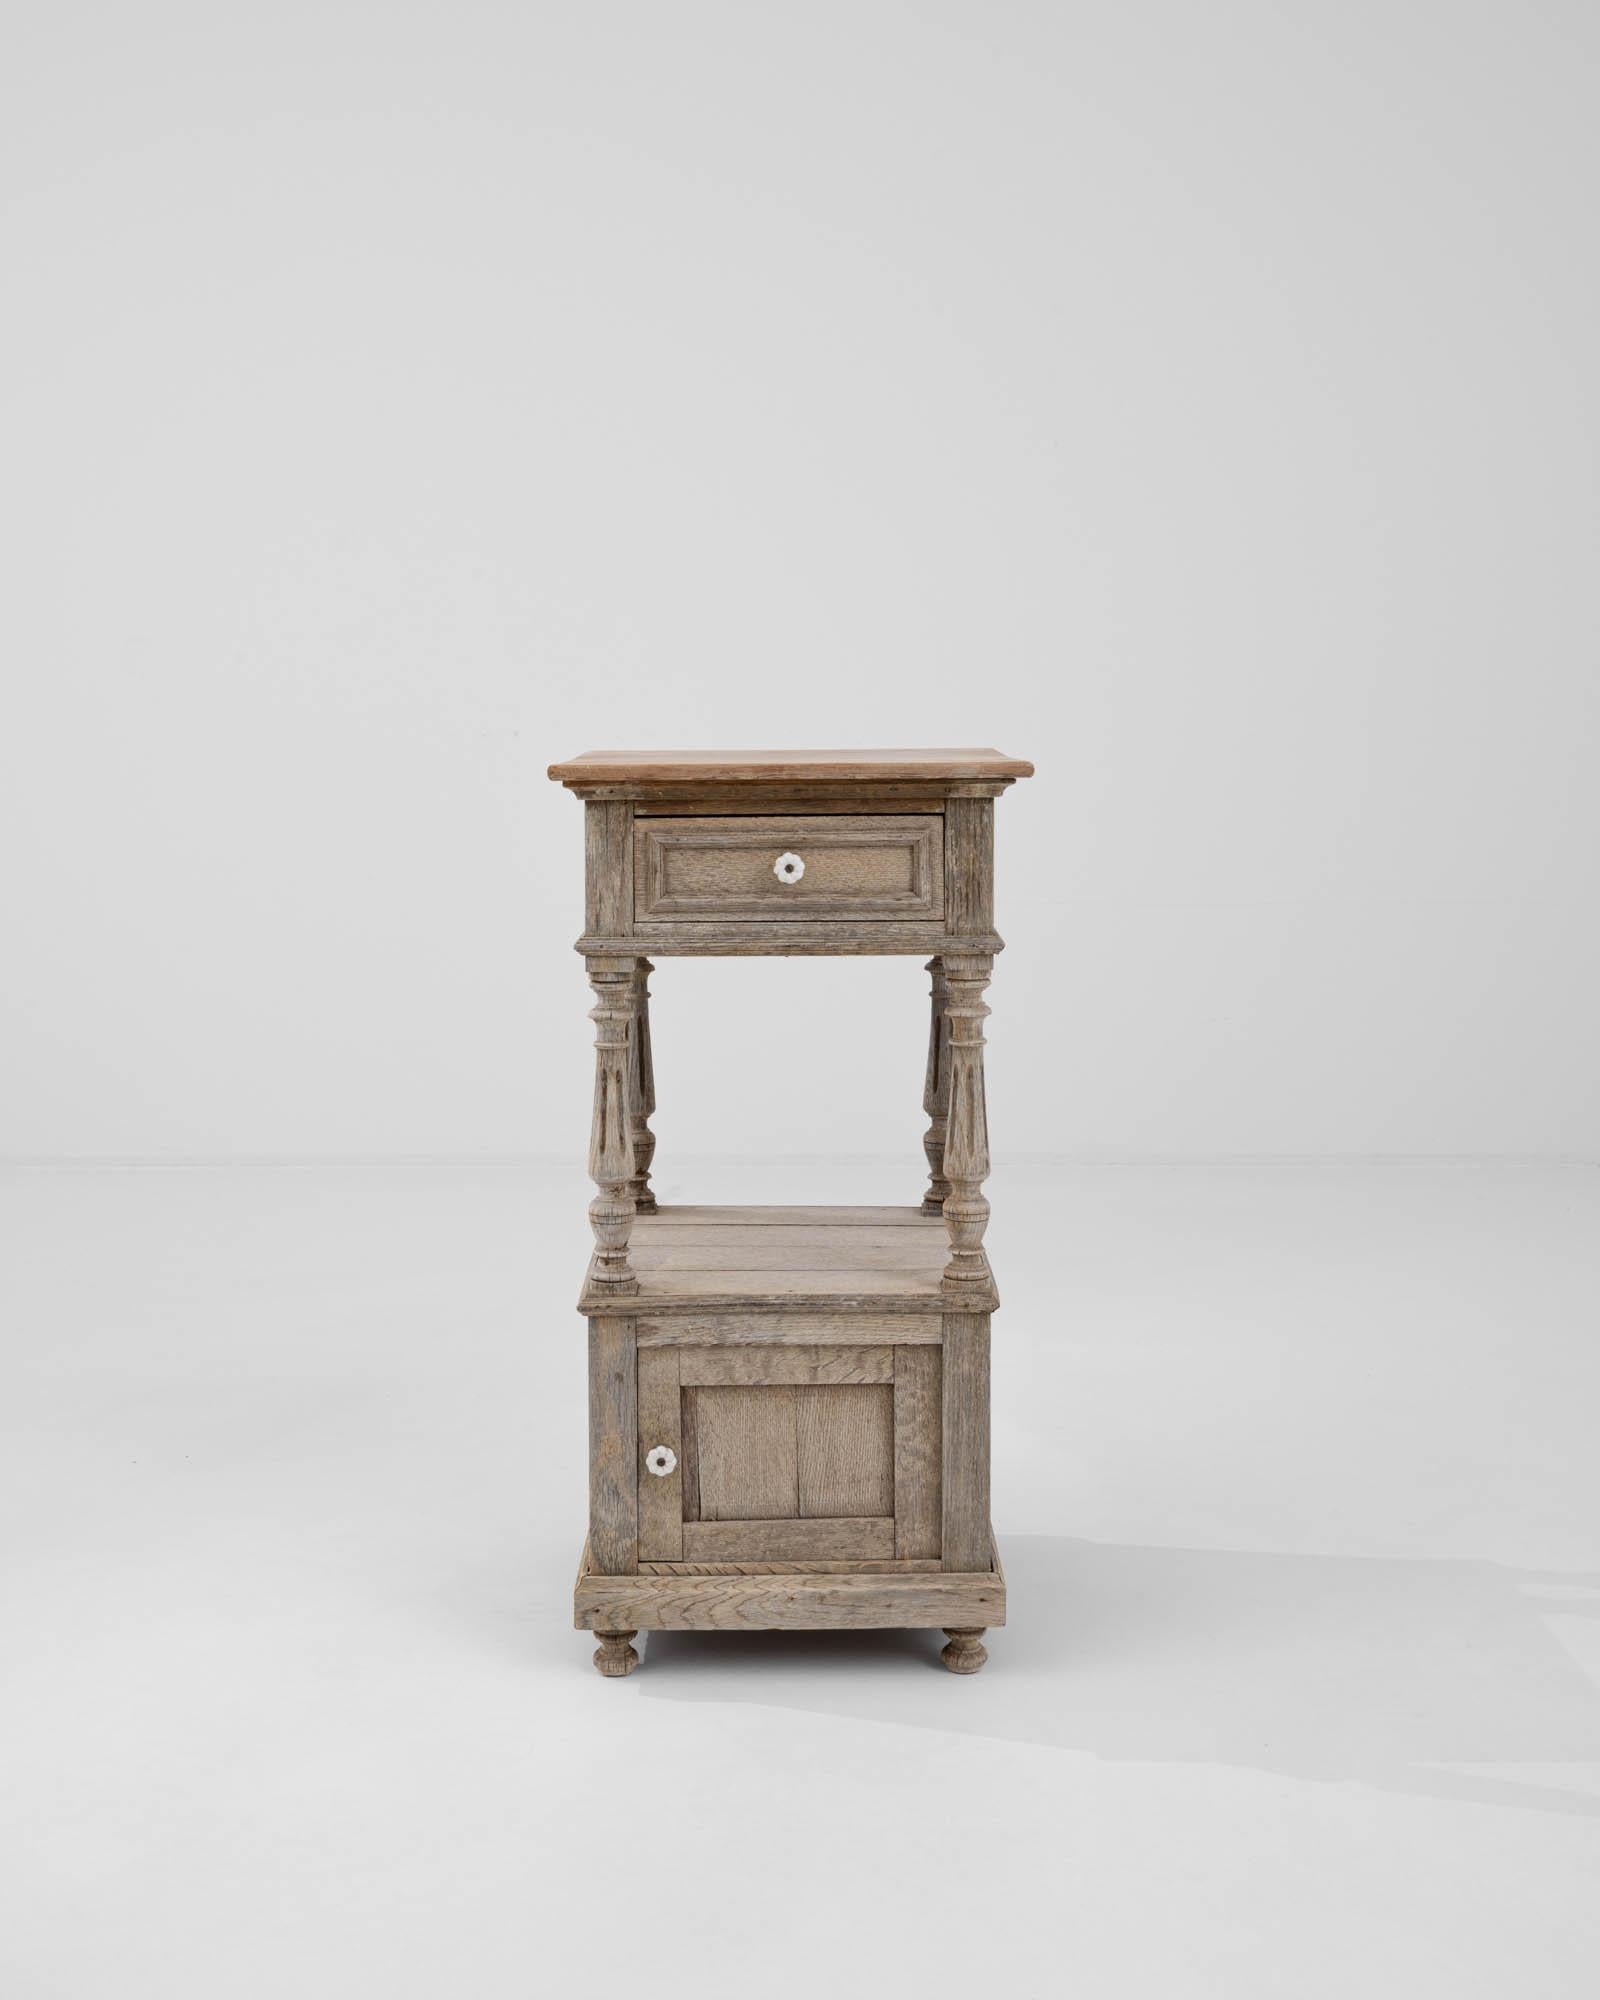 This early 1900s Belgian Bleached Oak Bedside table epitomizes rustic charm and understated elegance. Crafted from the finest oak, its bleached finish highlights the natural grain and texture, invoking a sense of serene antiquity. The table features